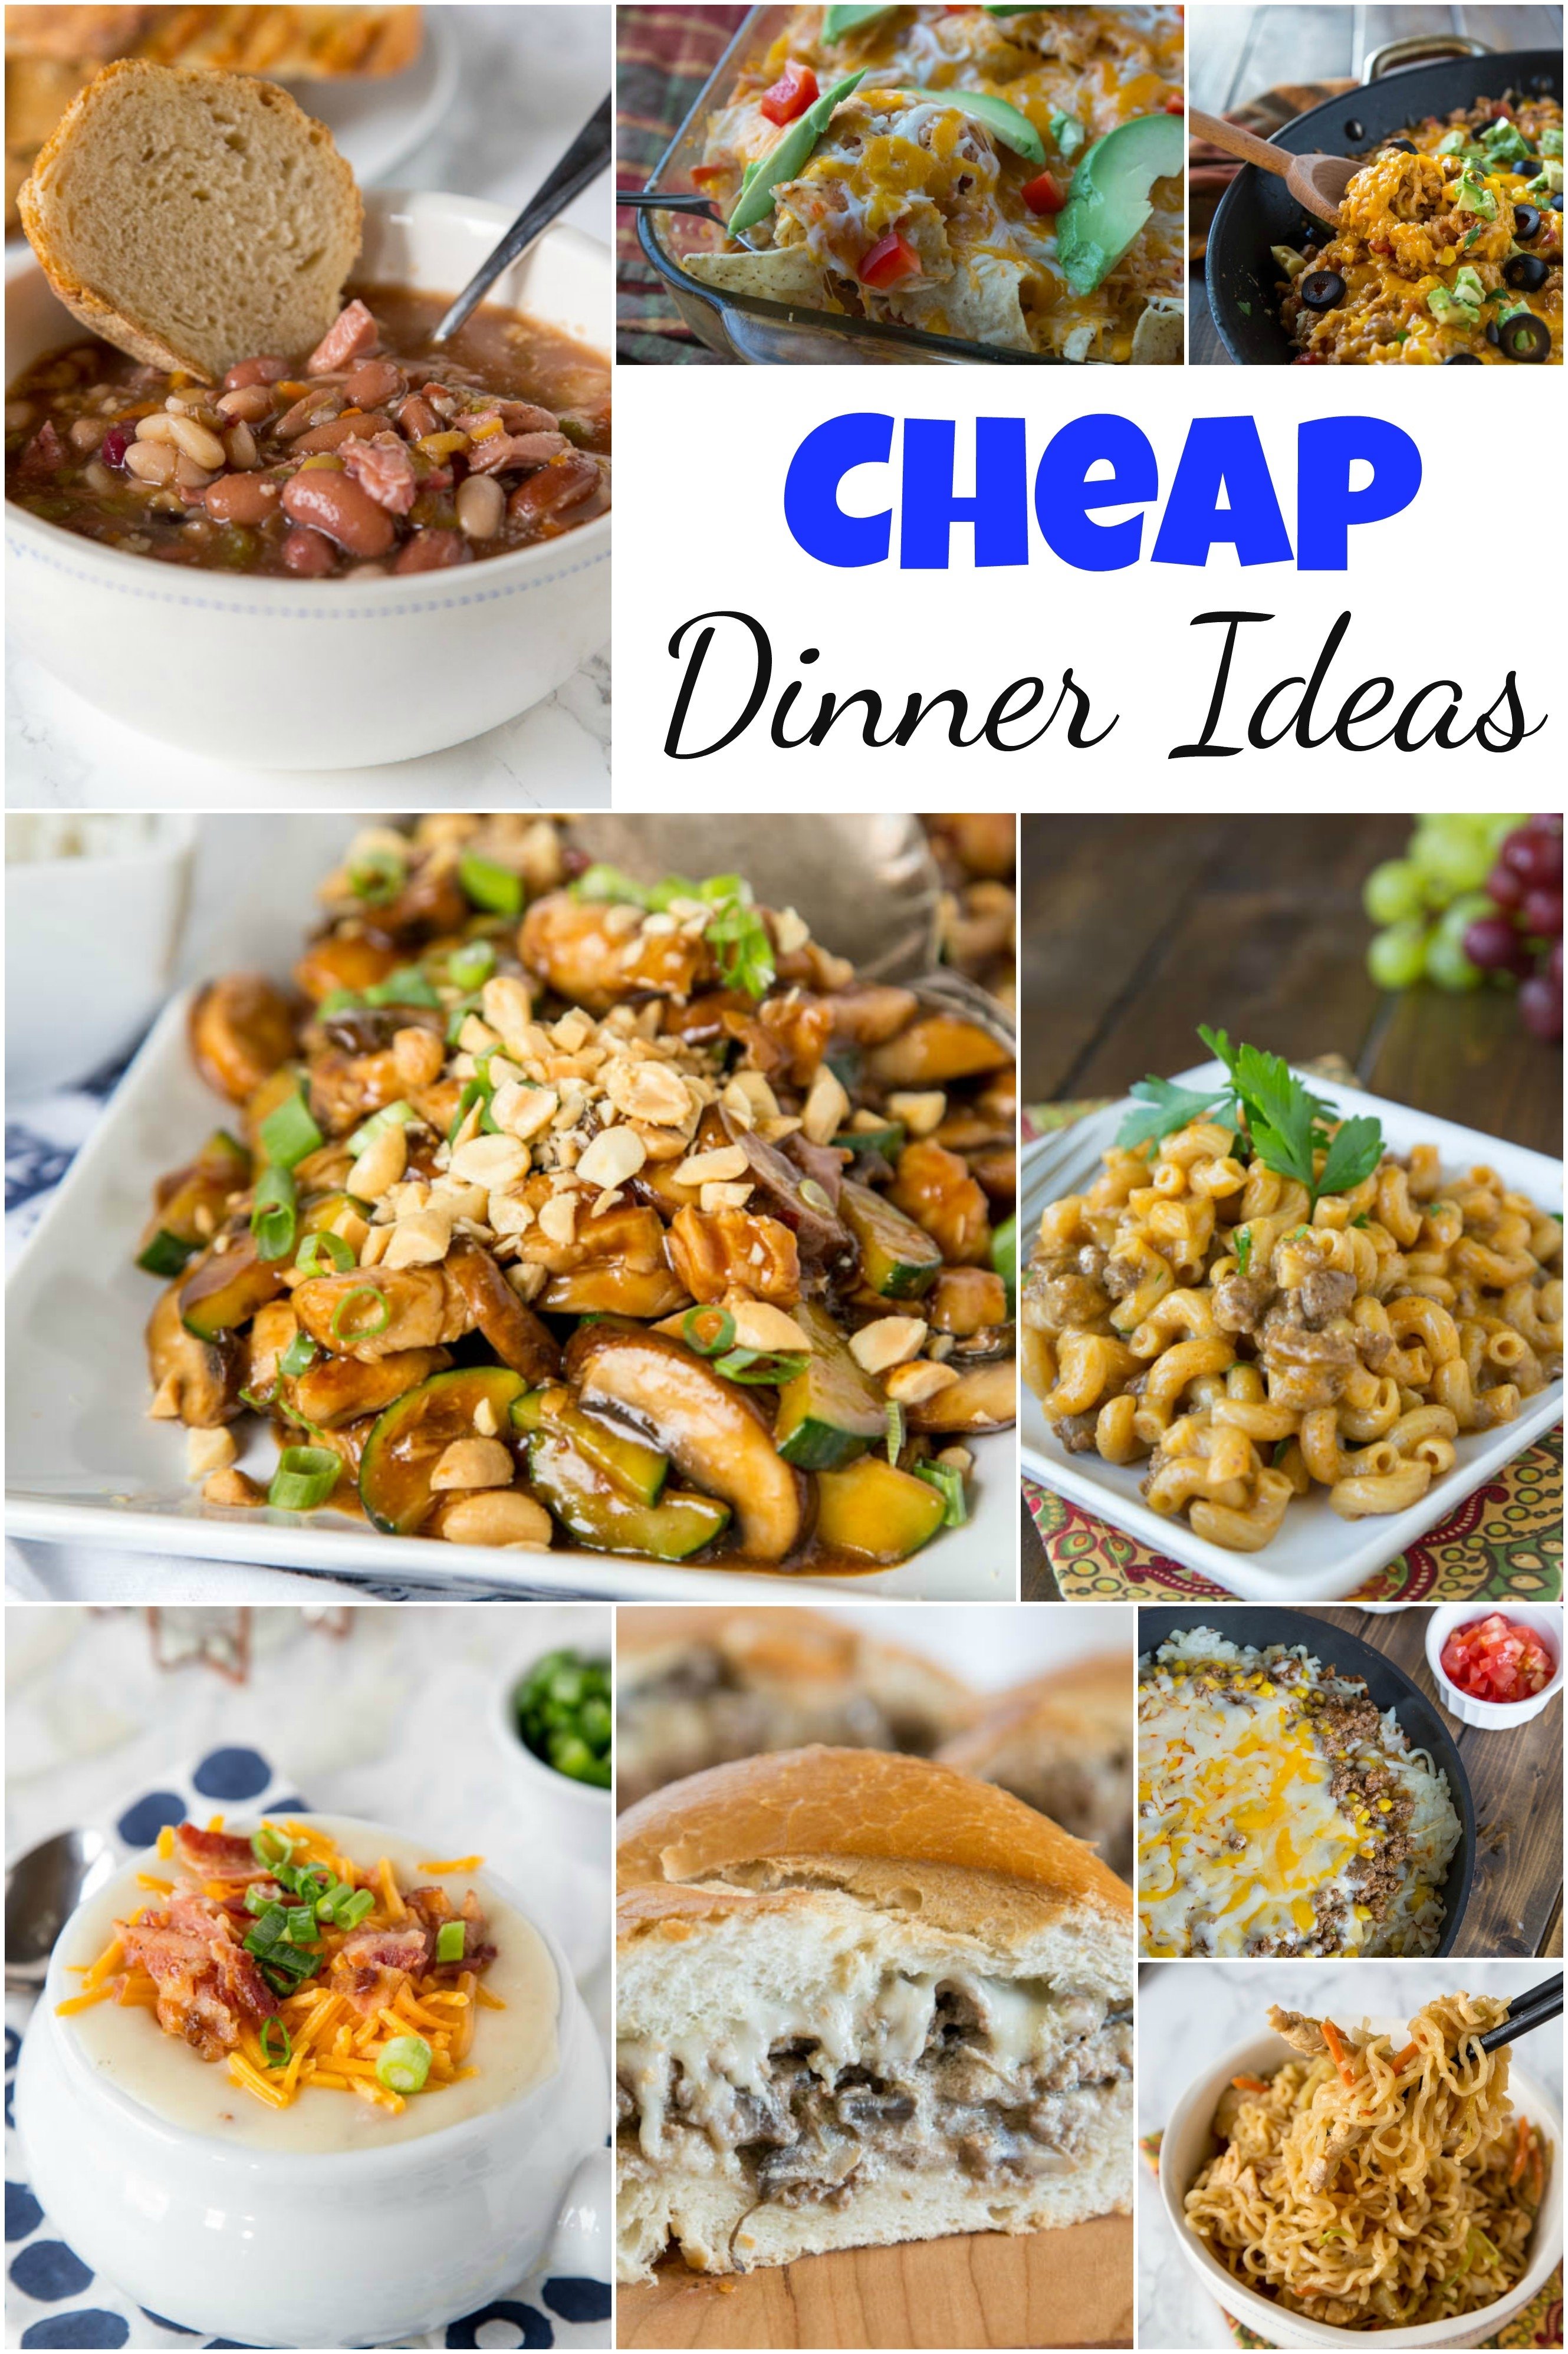 All Time top 15 Quick Cheap Dinner Ideas – Easy Recipes To Make at Home